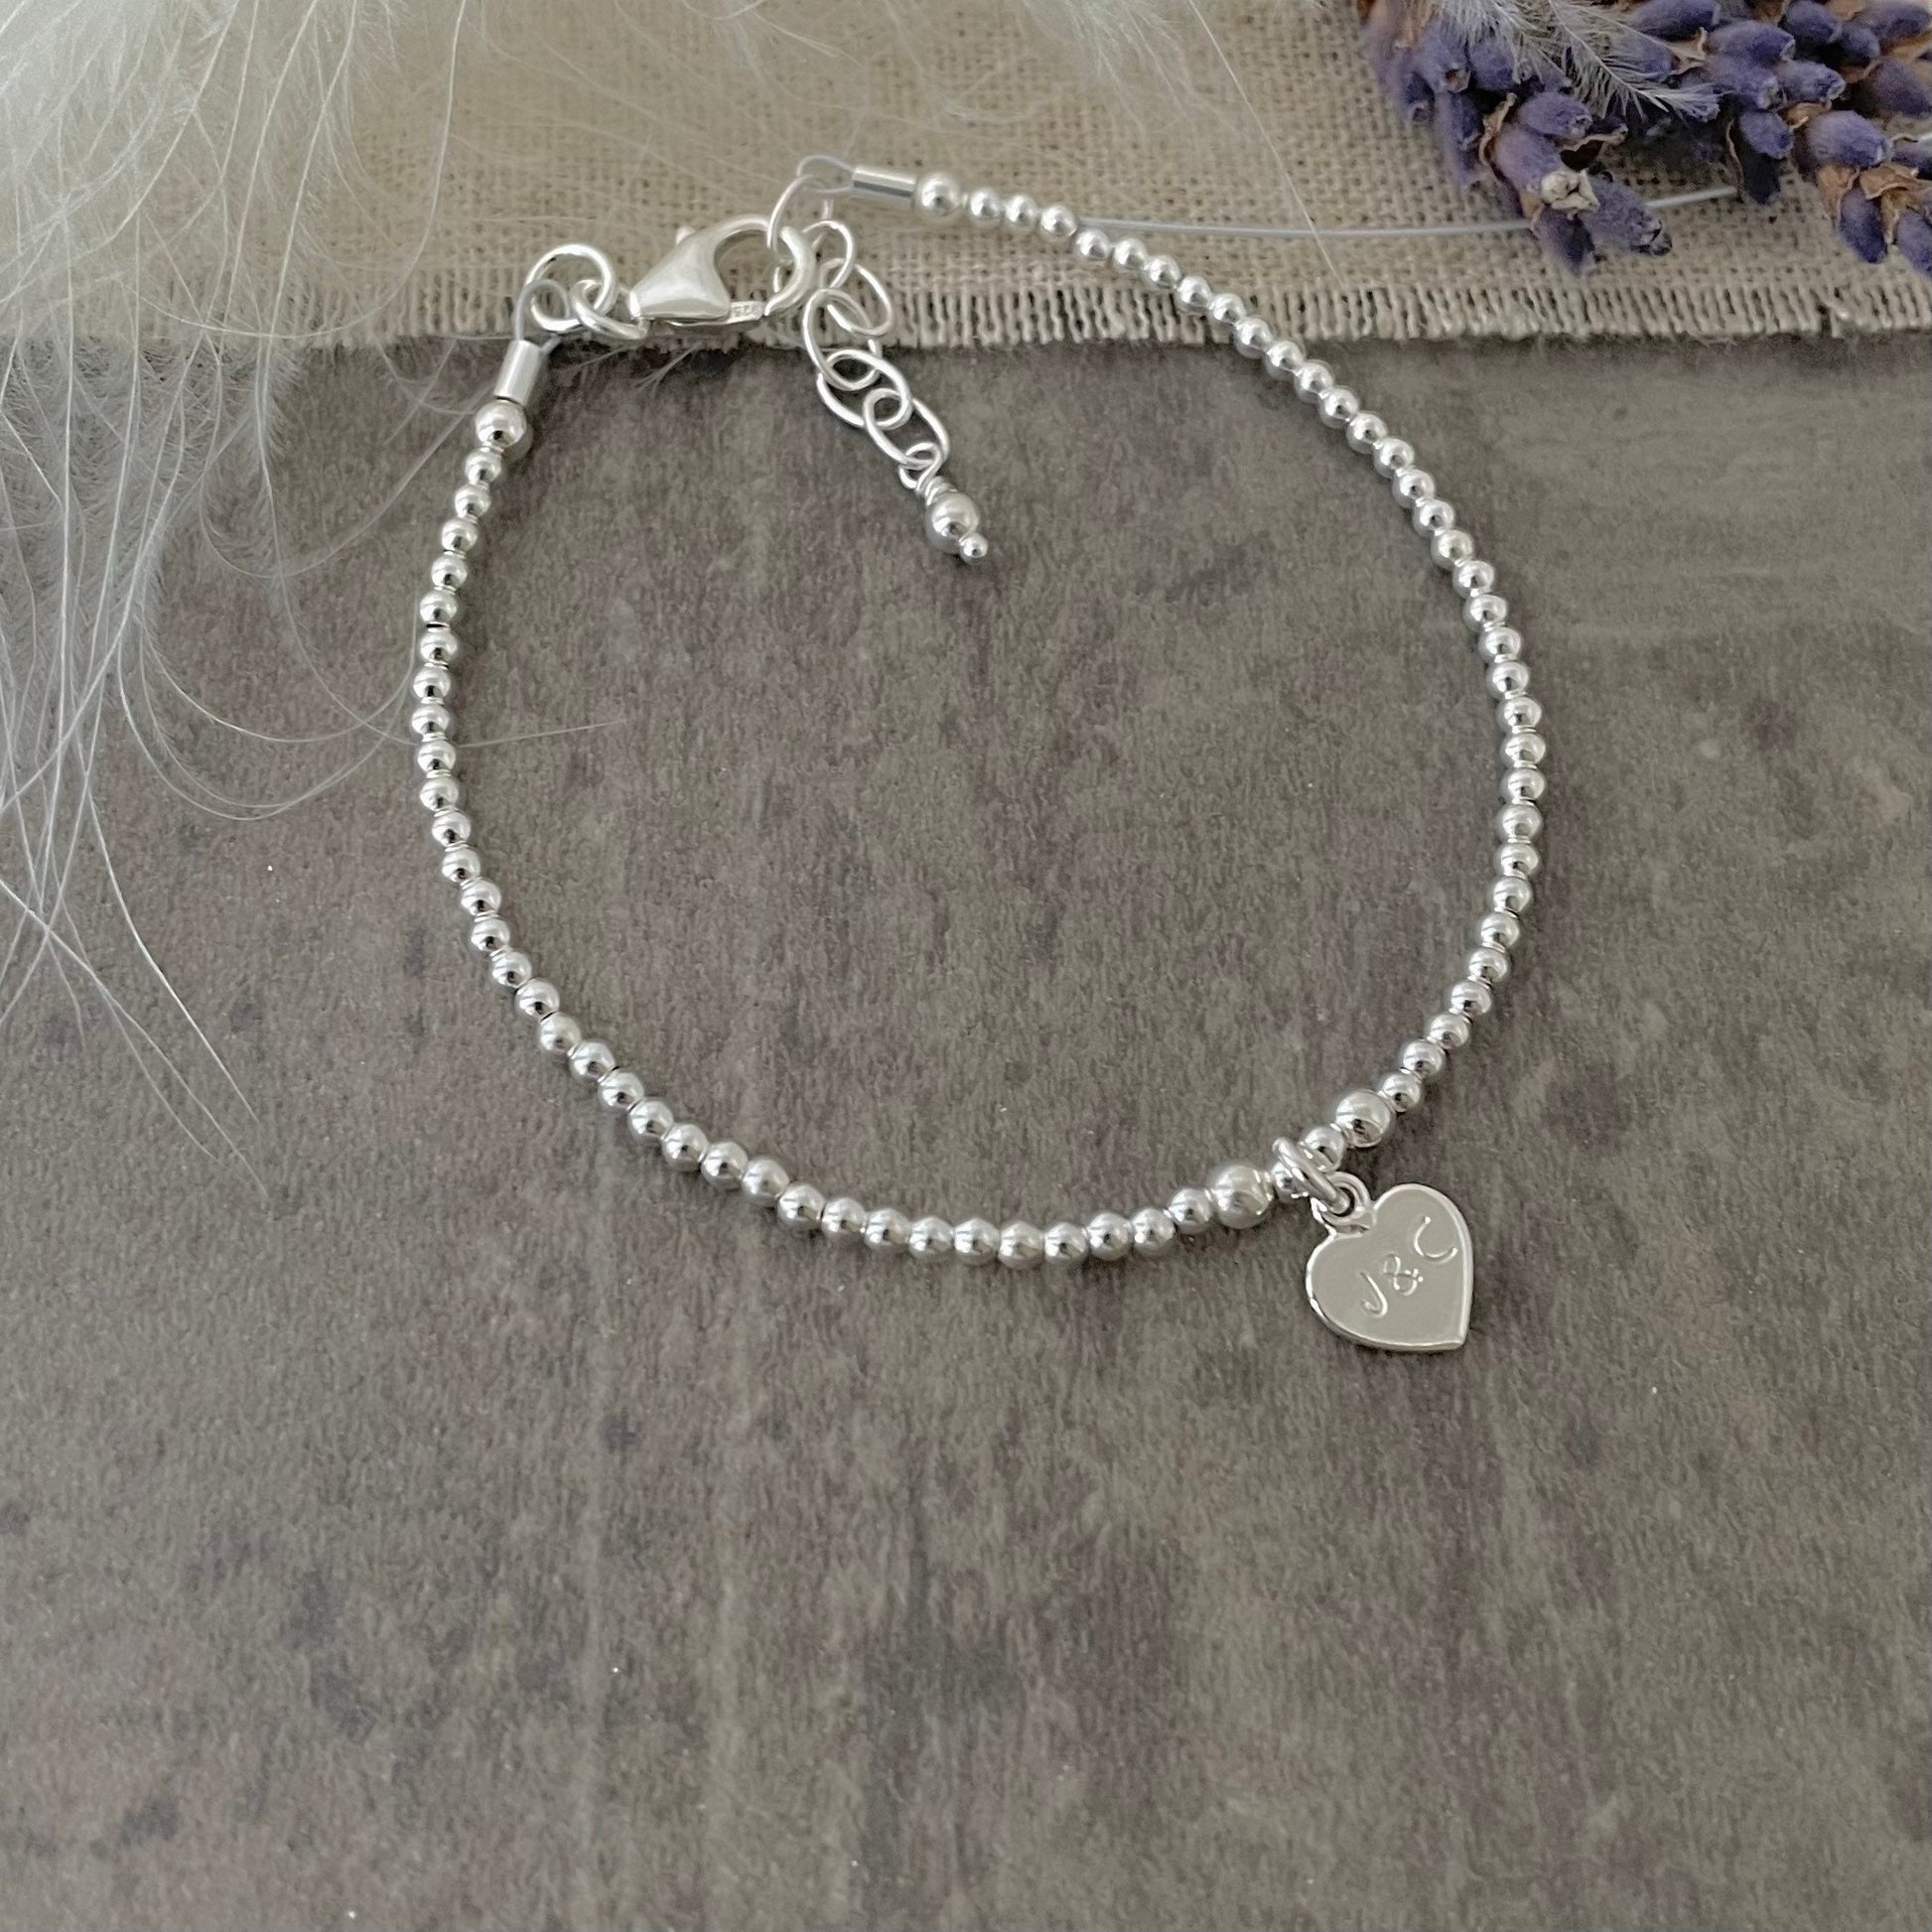 Valentines Day Bracelet in Sterling Silver, Couples Initials on Dainty Personalised Bracelet nft